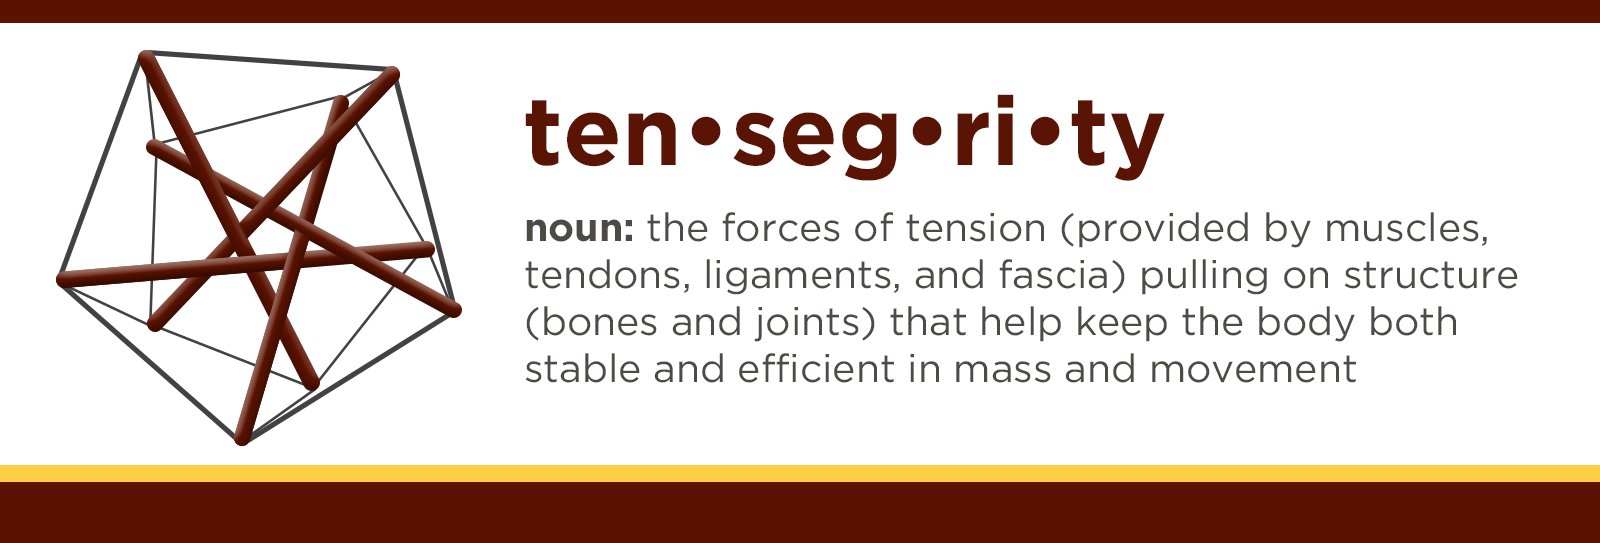 tensegrity - noun: the forces oftension (provided by muscles, tendons, ligaments, and fascia) pulling on structure (bones and joints) that help keep the body both stable and efficient in mass and movement